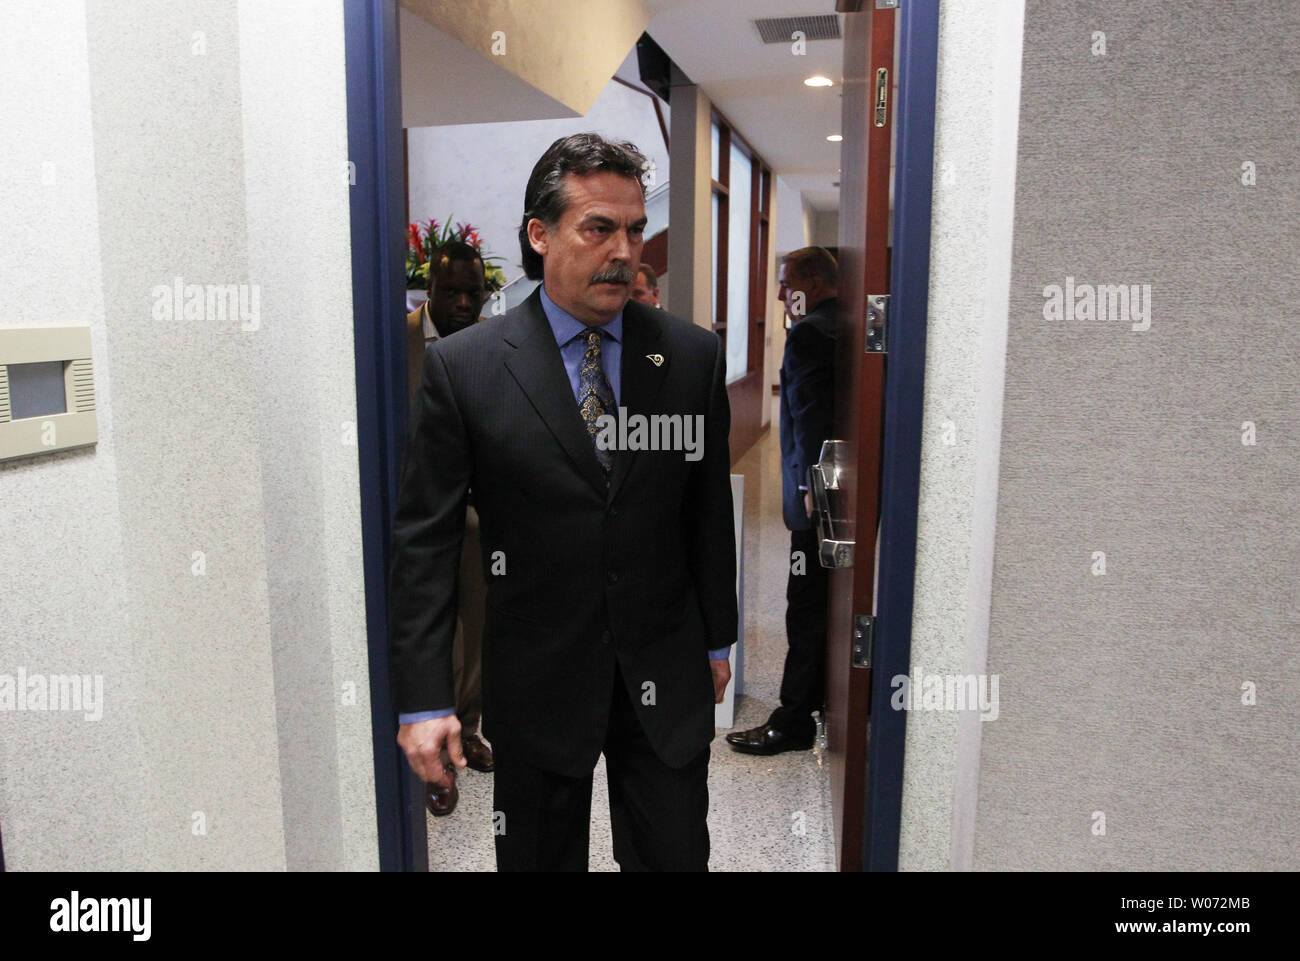 St. Louis Rams new head coach Jeff Fisher enter the room to be introduced at the team's practice facility in Earth City, Missouri on January 17, 2012.   UPI/Bill Greenblatt Stock Photo